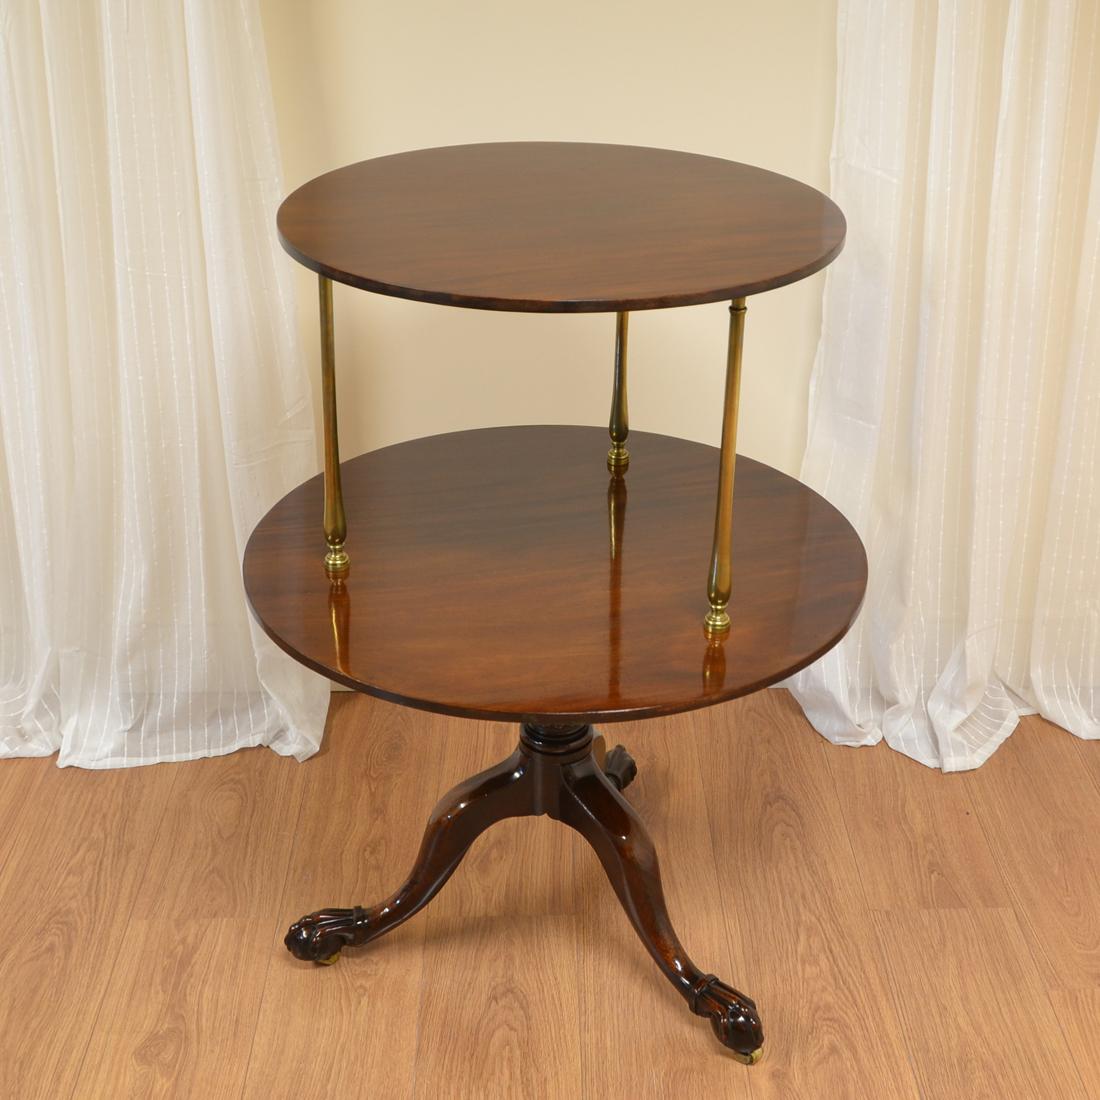 18th Century Georgian Mahogany Antique Two Tier Circular Occasional Lamp Table For Sale 4